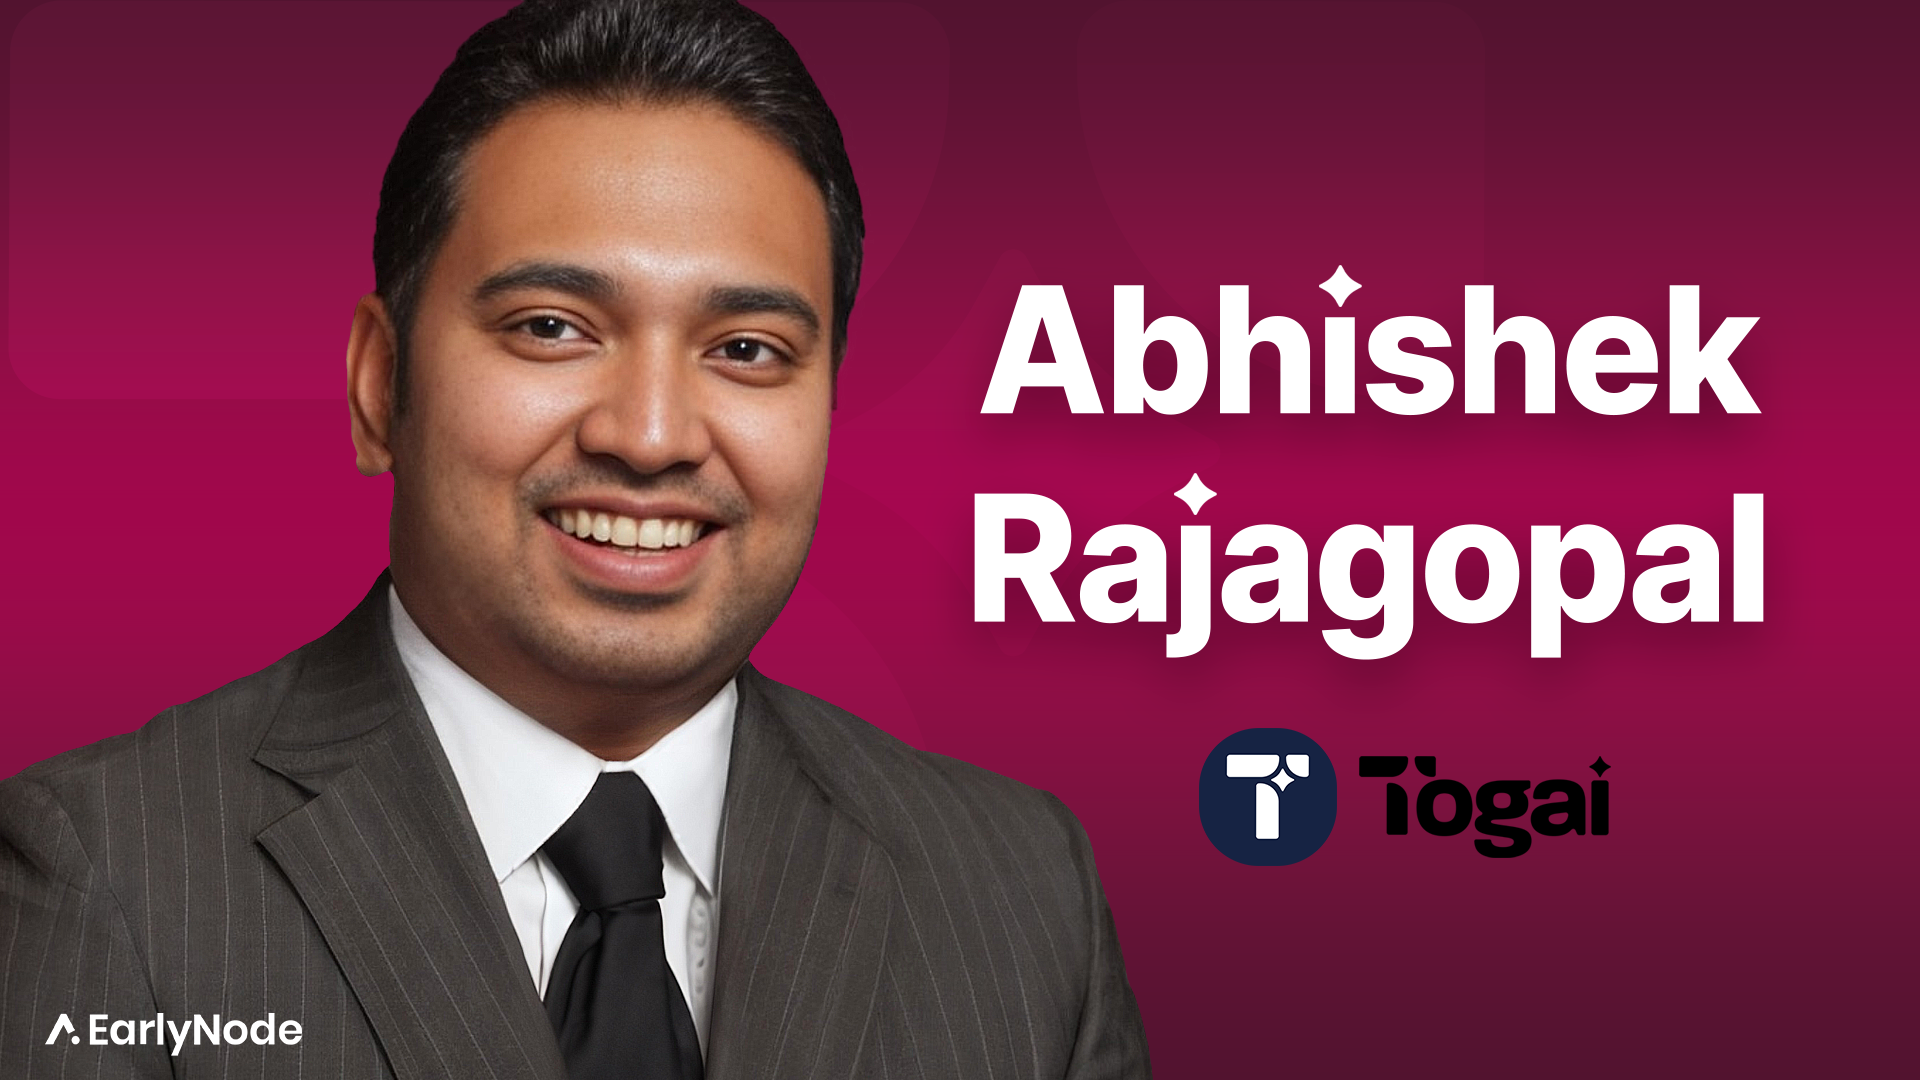 Making Usage-Based Pricing Dead Simple with Abhishek Rajagopal, Founder of Togai